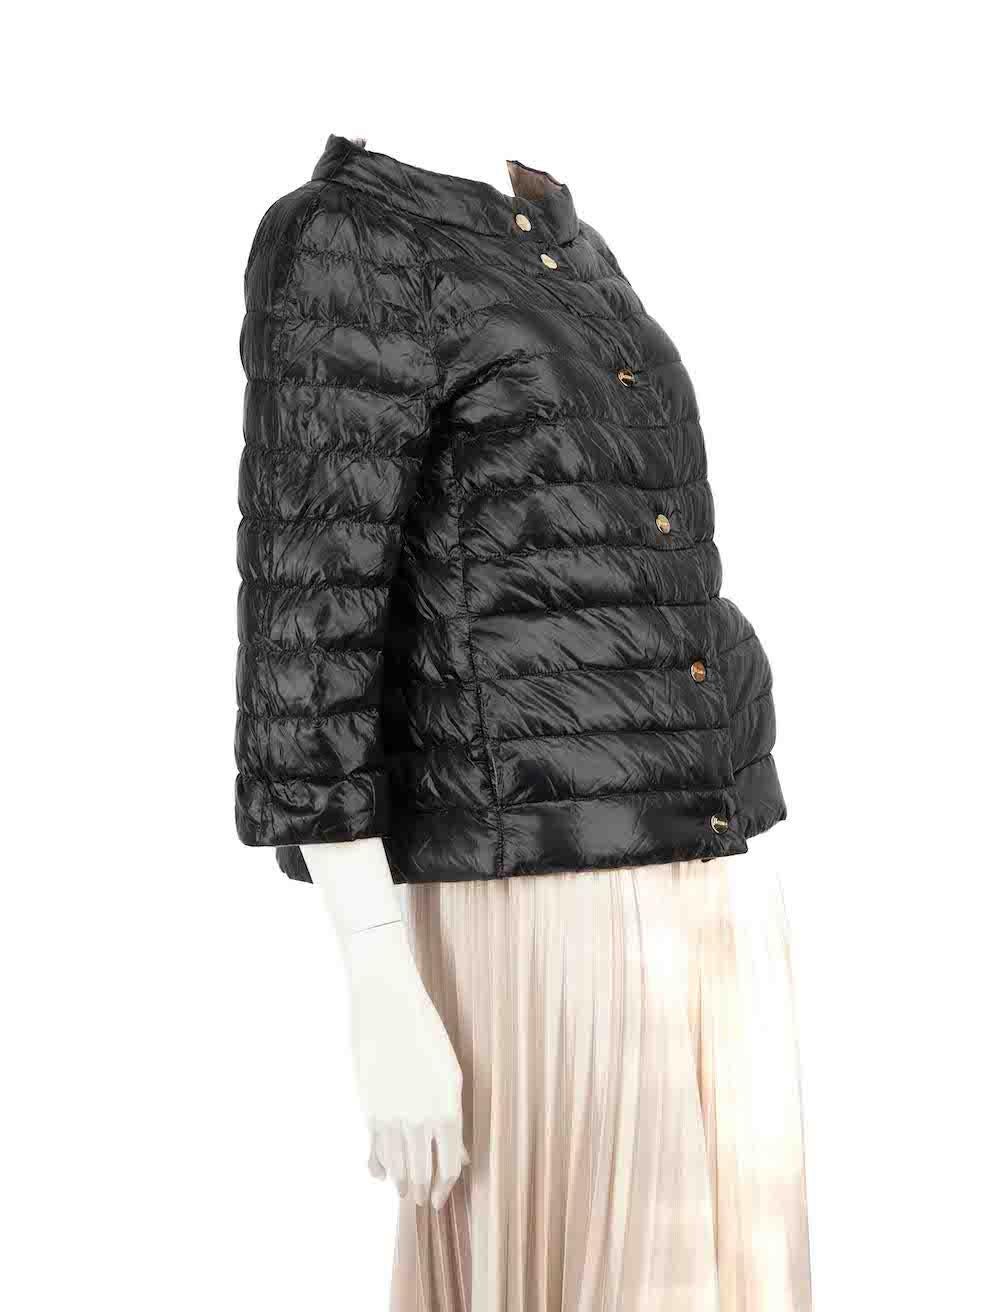 CONDITION is Very good. Minimal wear to coat is evident. Minimal wear to the button fastenings with light scratches to the metal on this used Herno designer resale item.
 
 
 
 Details
 
 
 Beige and black
 
 Synthetic
 
 Shell jacket
 
 Quilted and